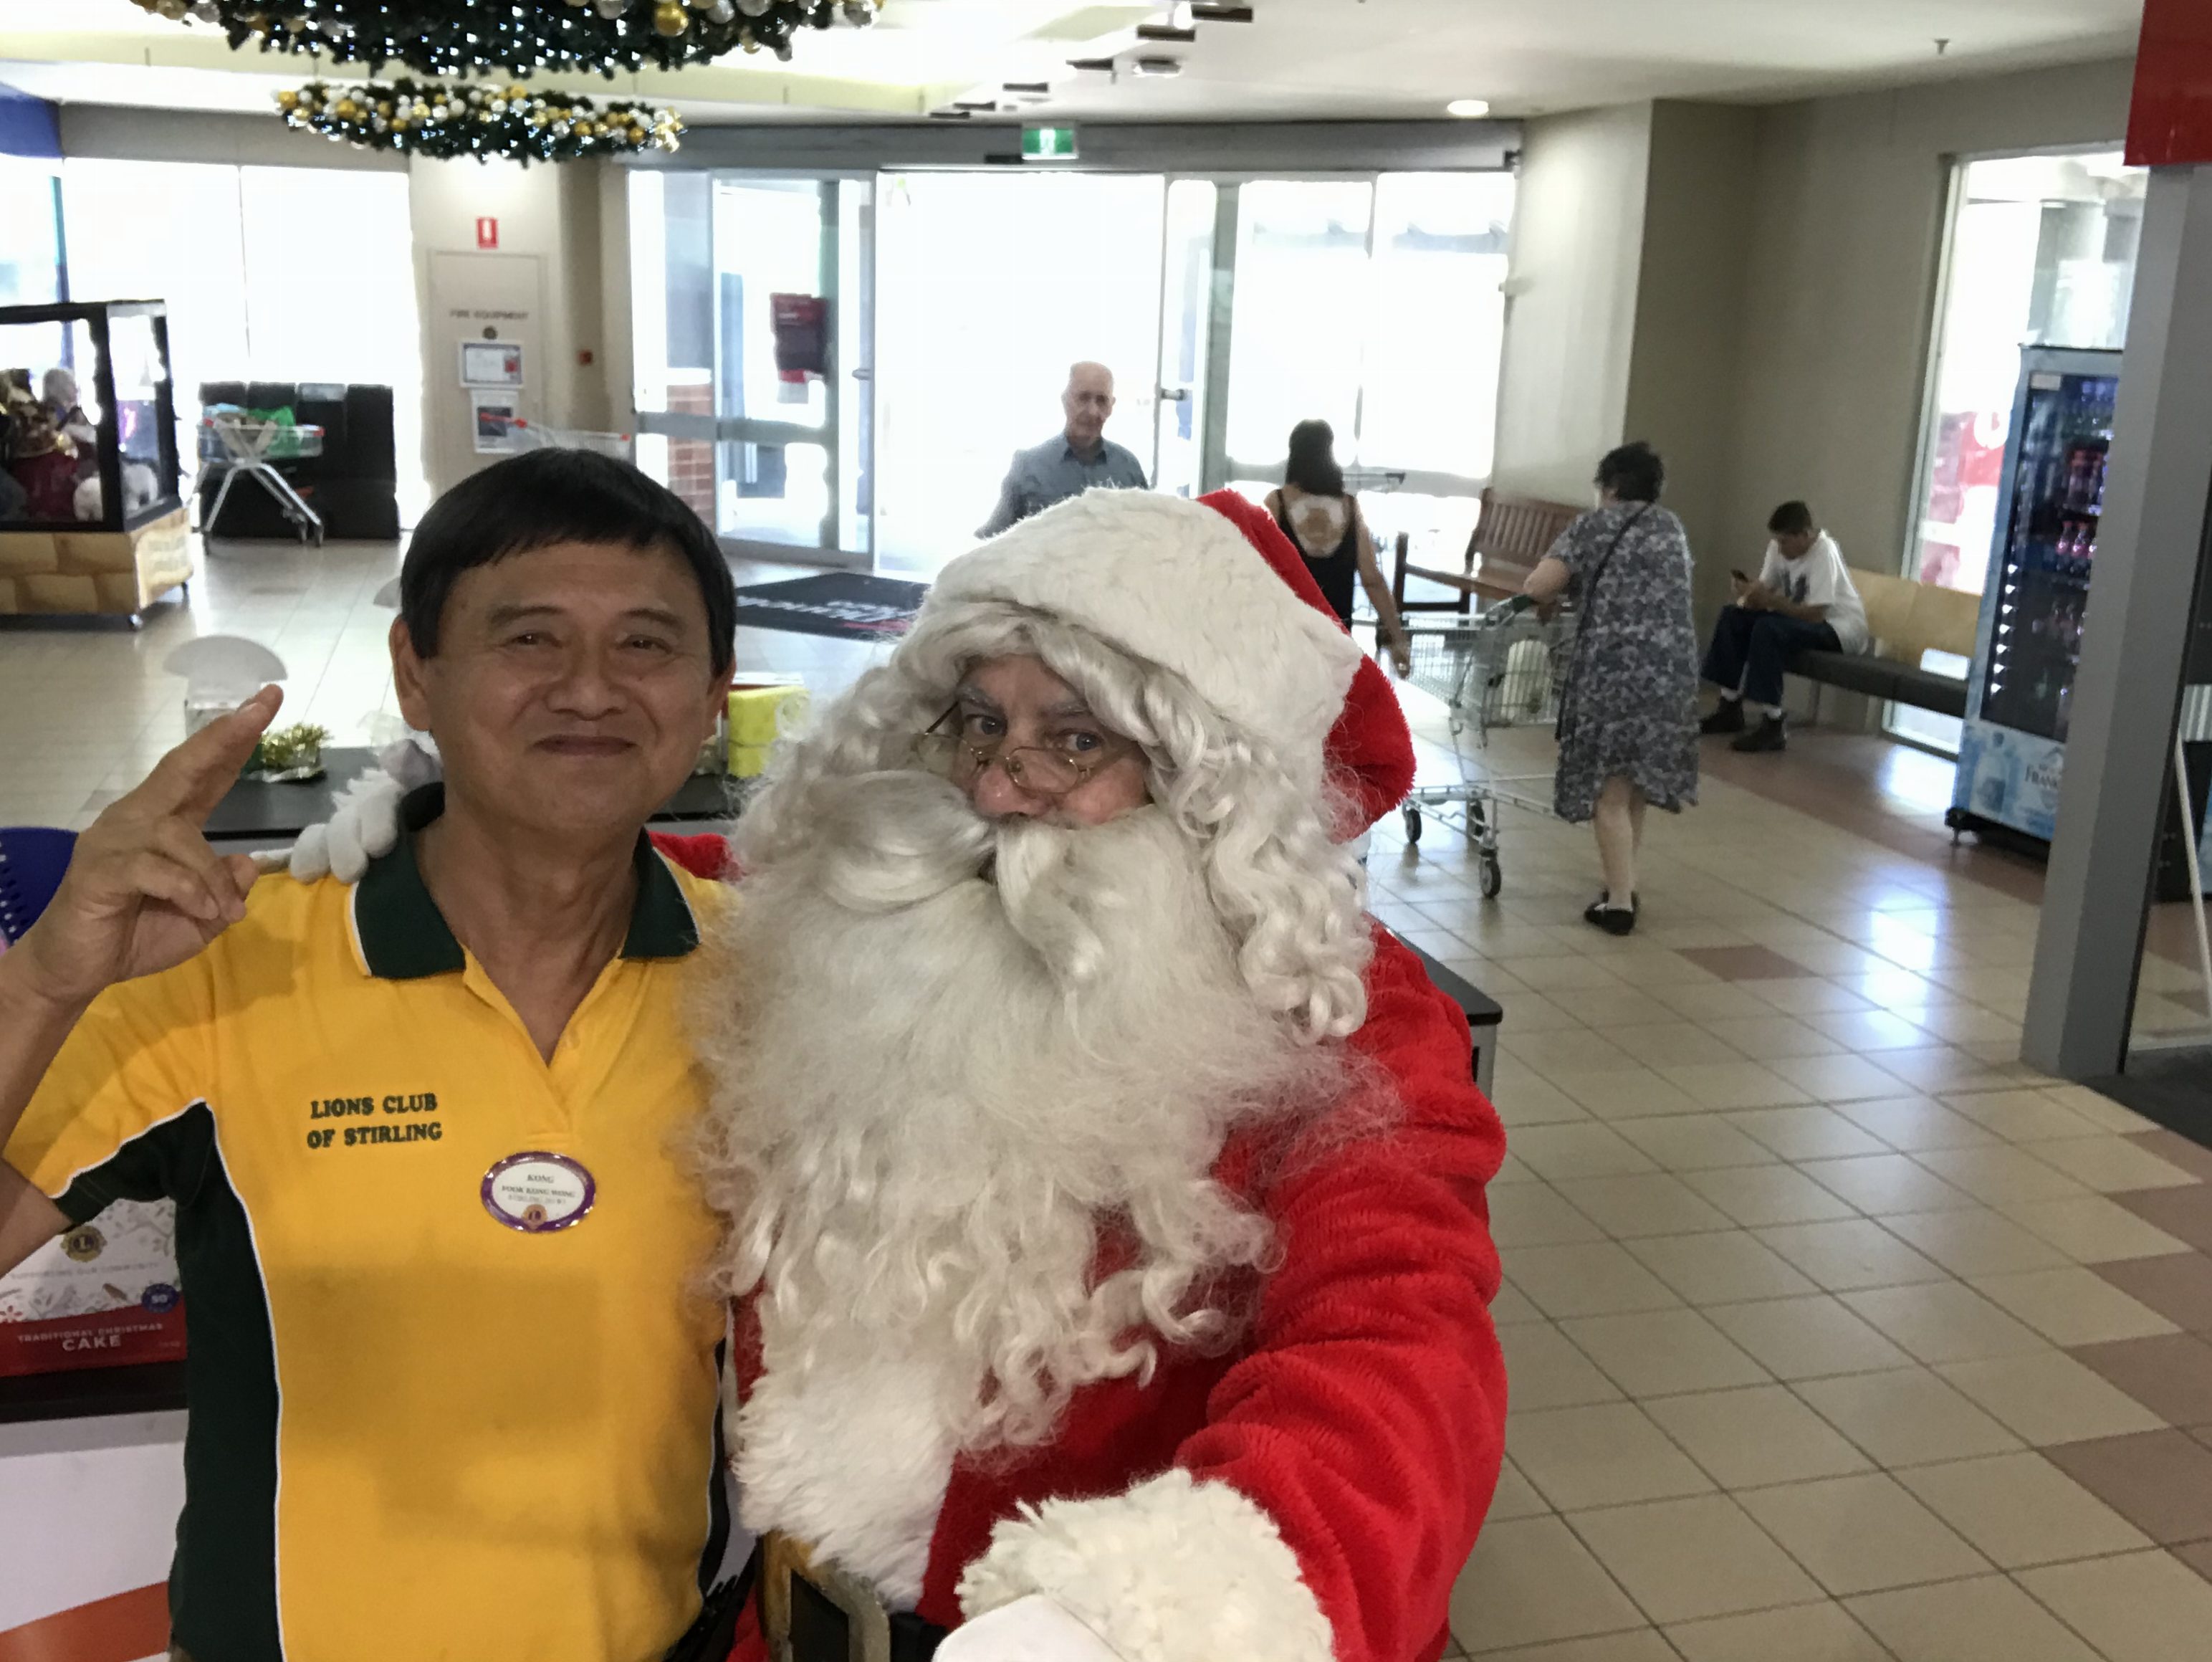 Santa supports Lions Groups